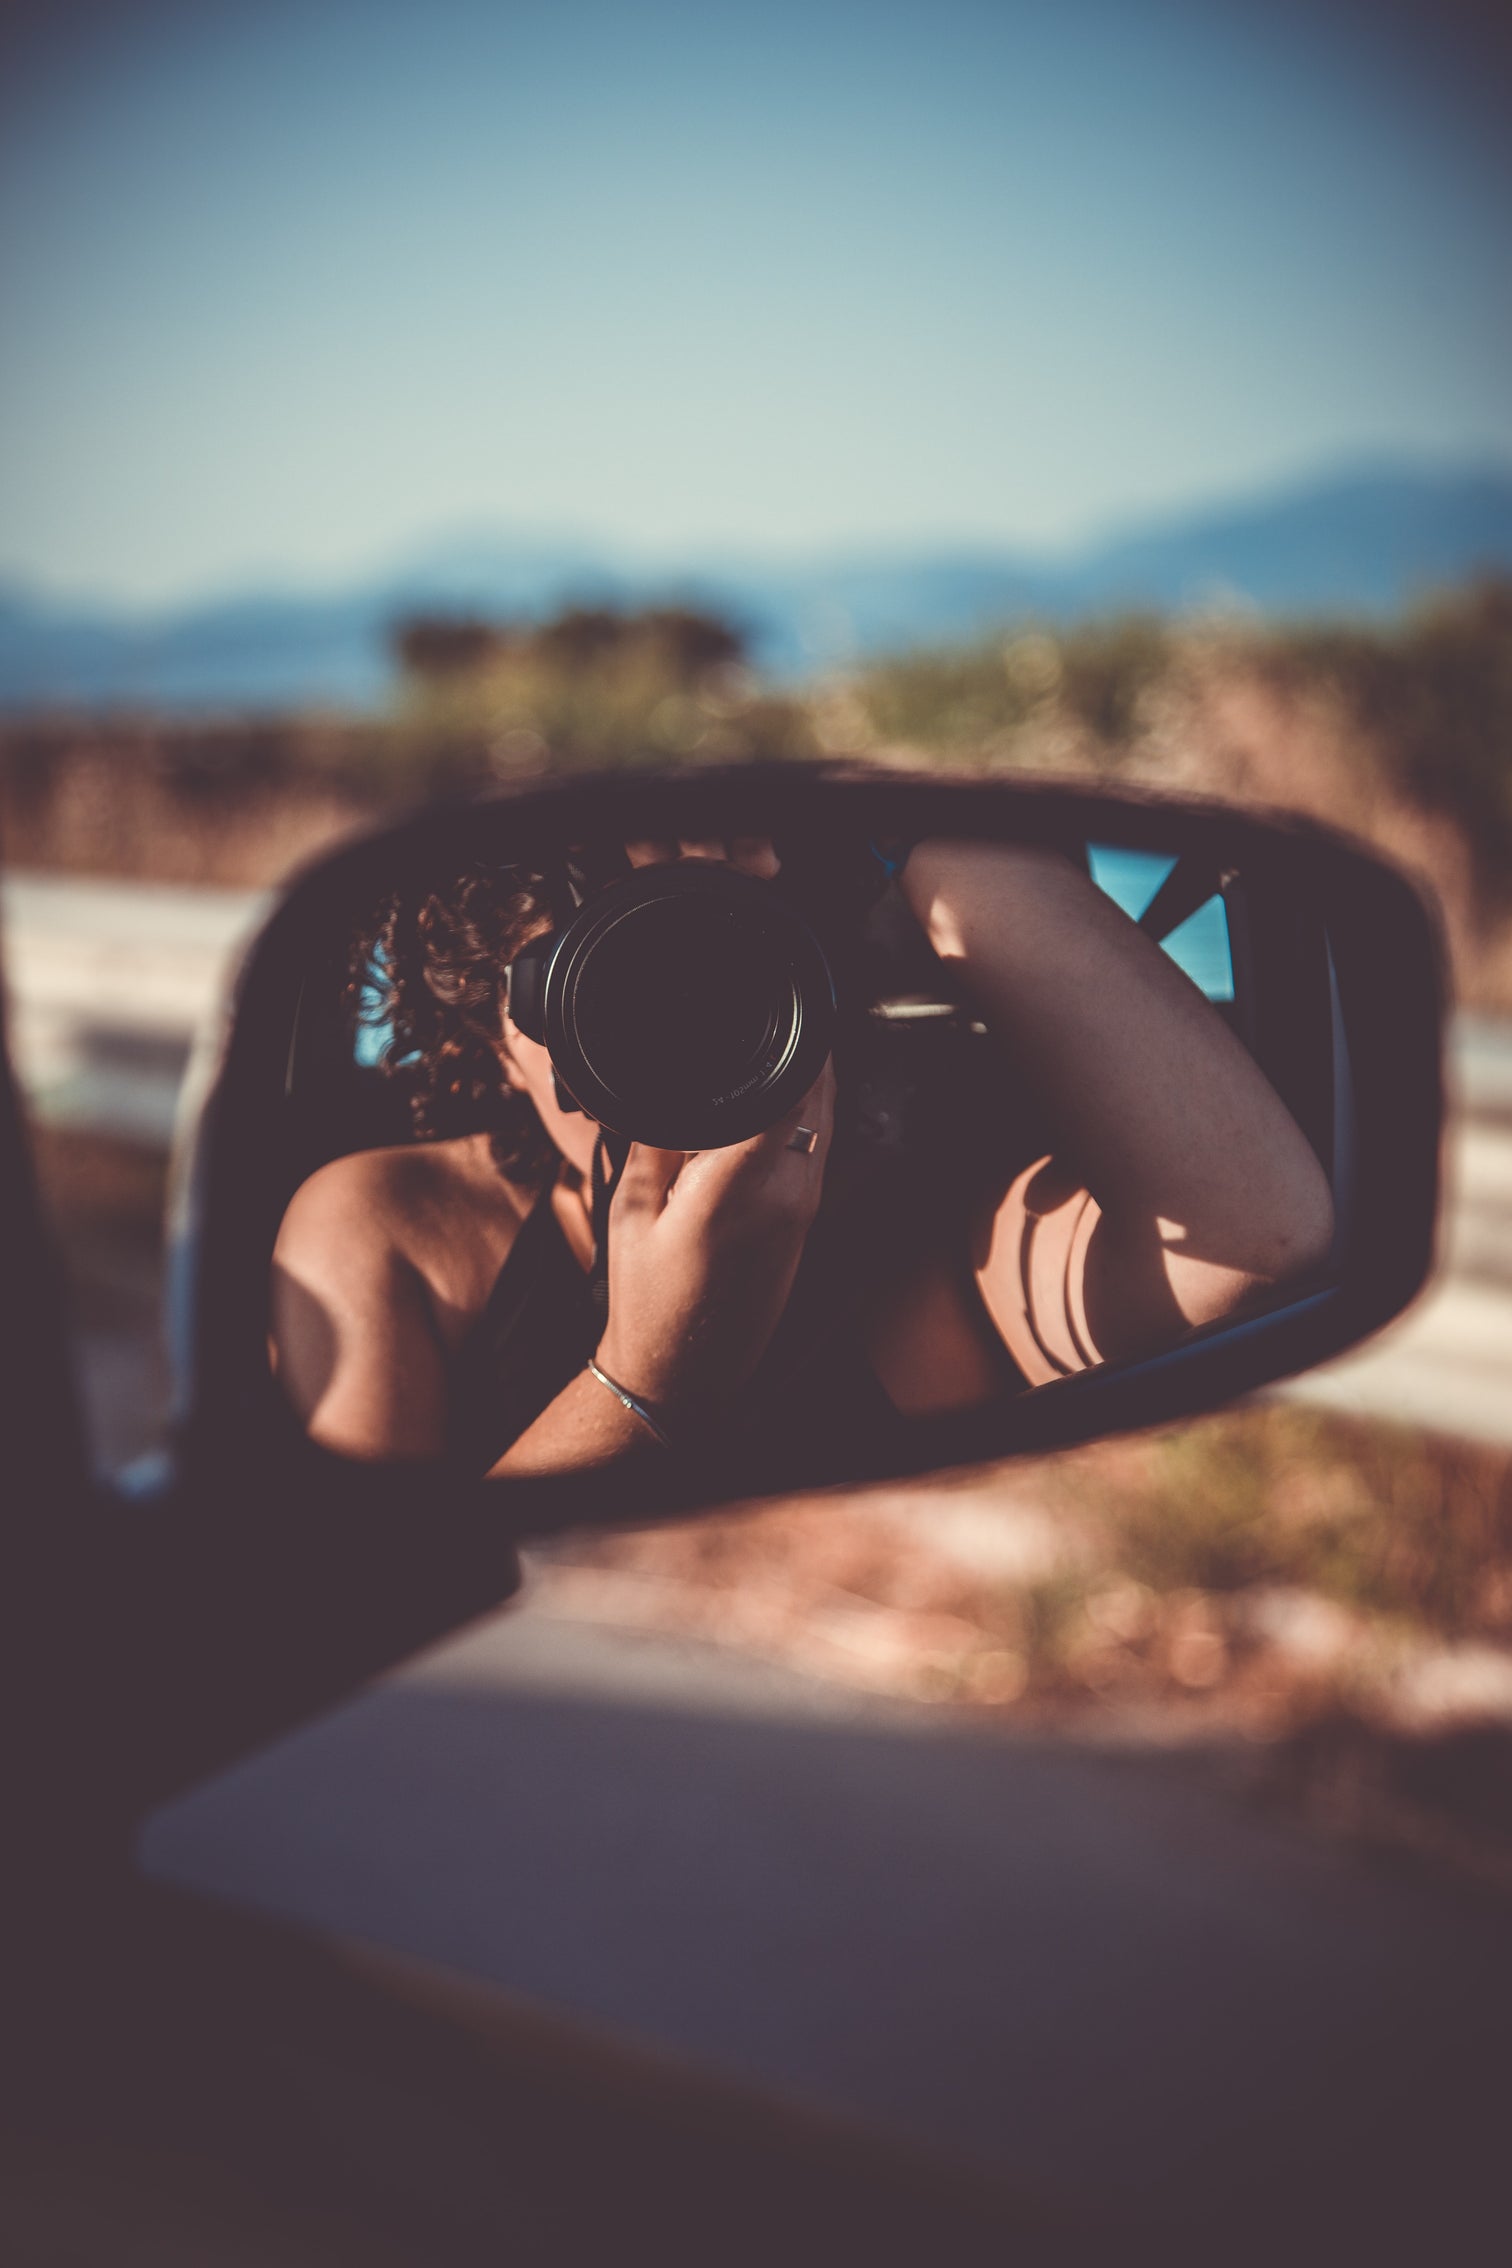 Woman taking photo can be seen in side view mirror of car.